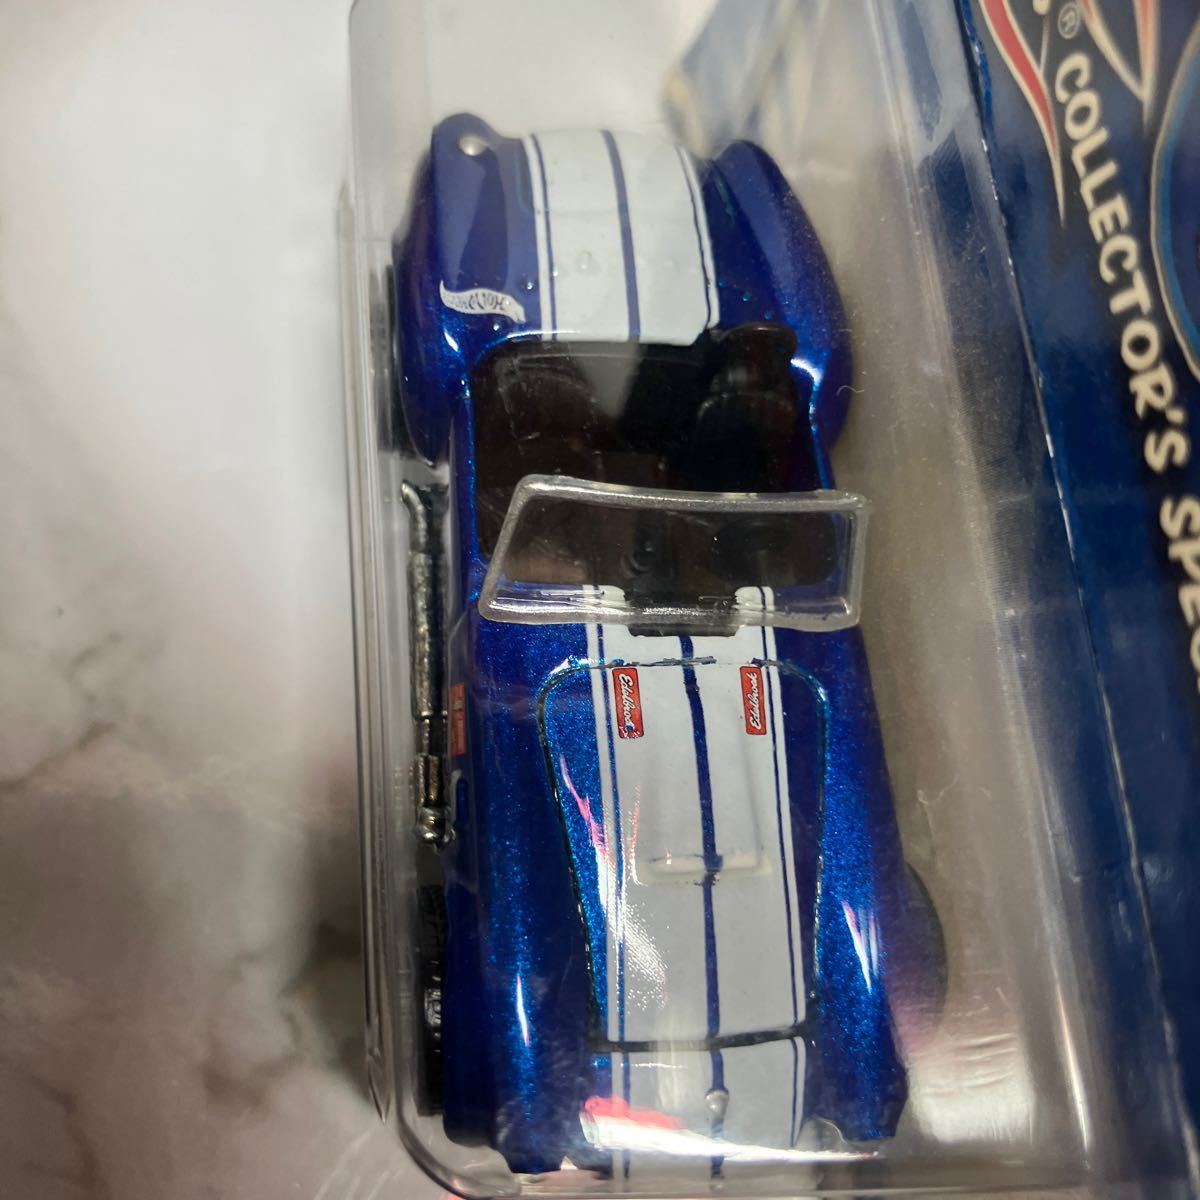 2403-3018 Hot Wheels 2002 TOKORO'S Collection 2台セット Classic Cobra / '70 Plymouth Road Runner 未開封品 60サイズ梱包予定_画像5